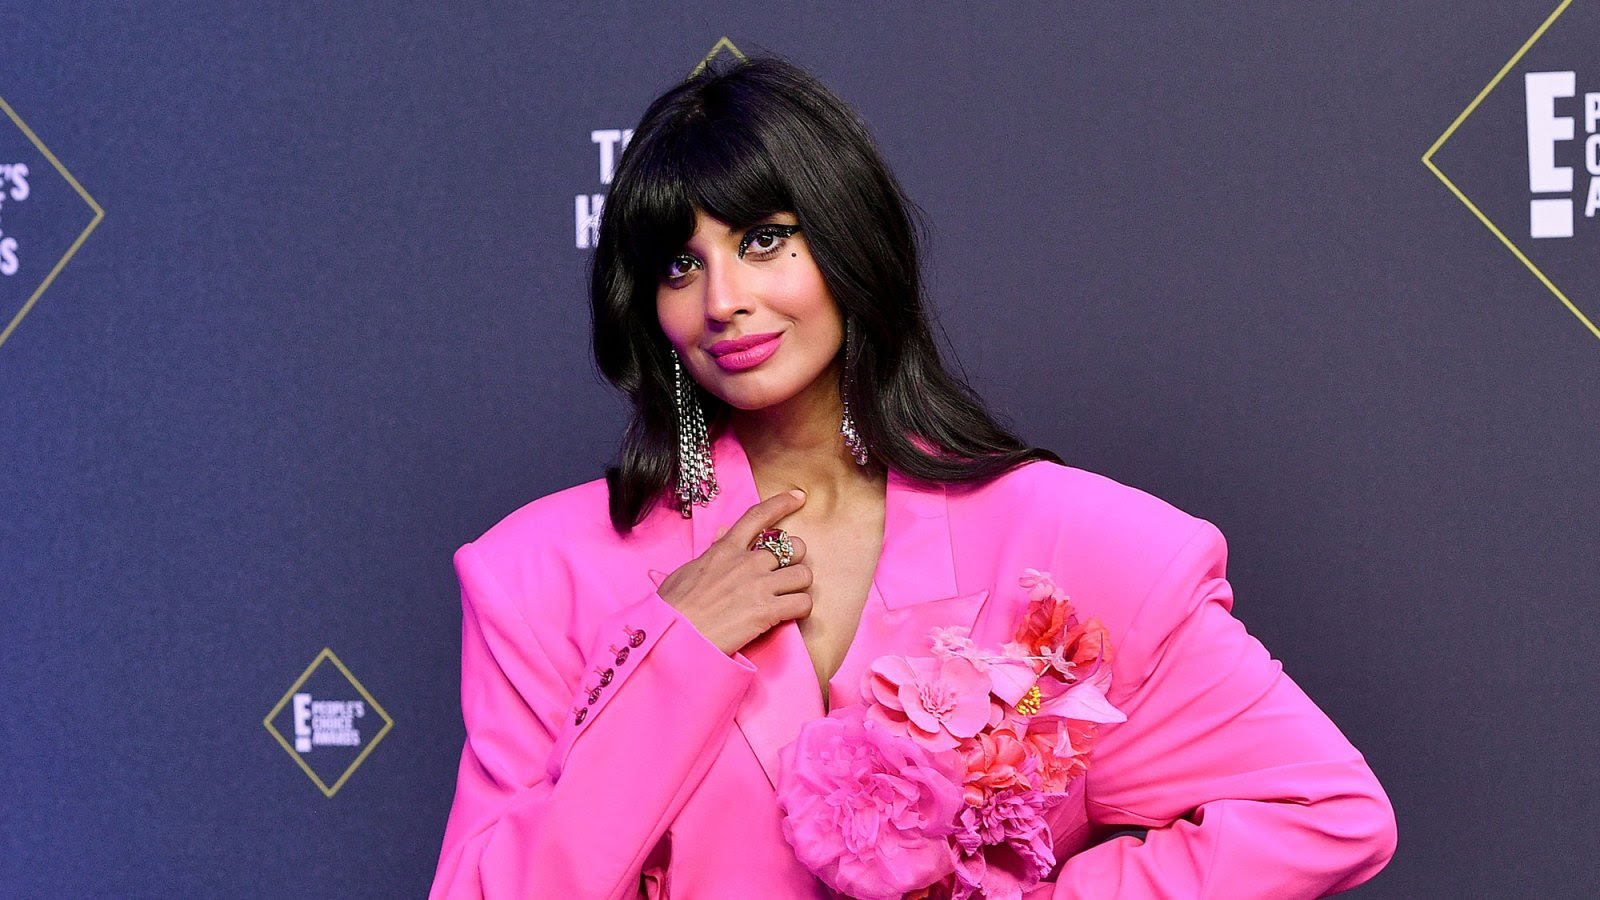 Jameela, a woman with long black hair, is standing in front
of a black wall. She wears a bright pink outfit with pink flowers and pink lipgloss. 